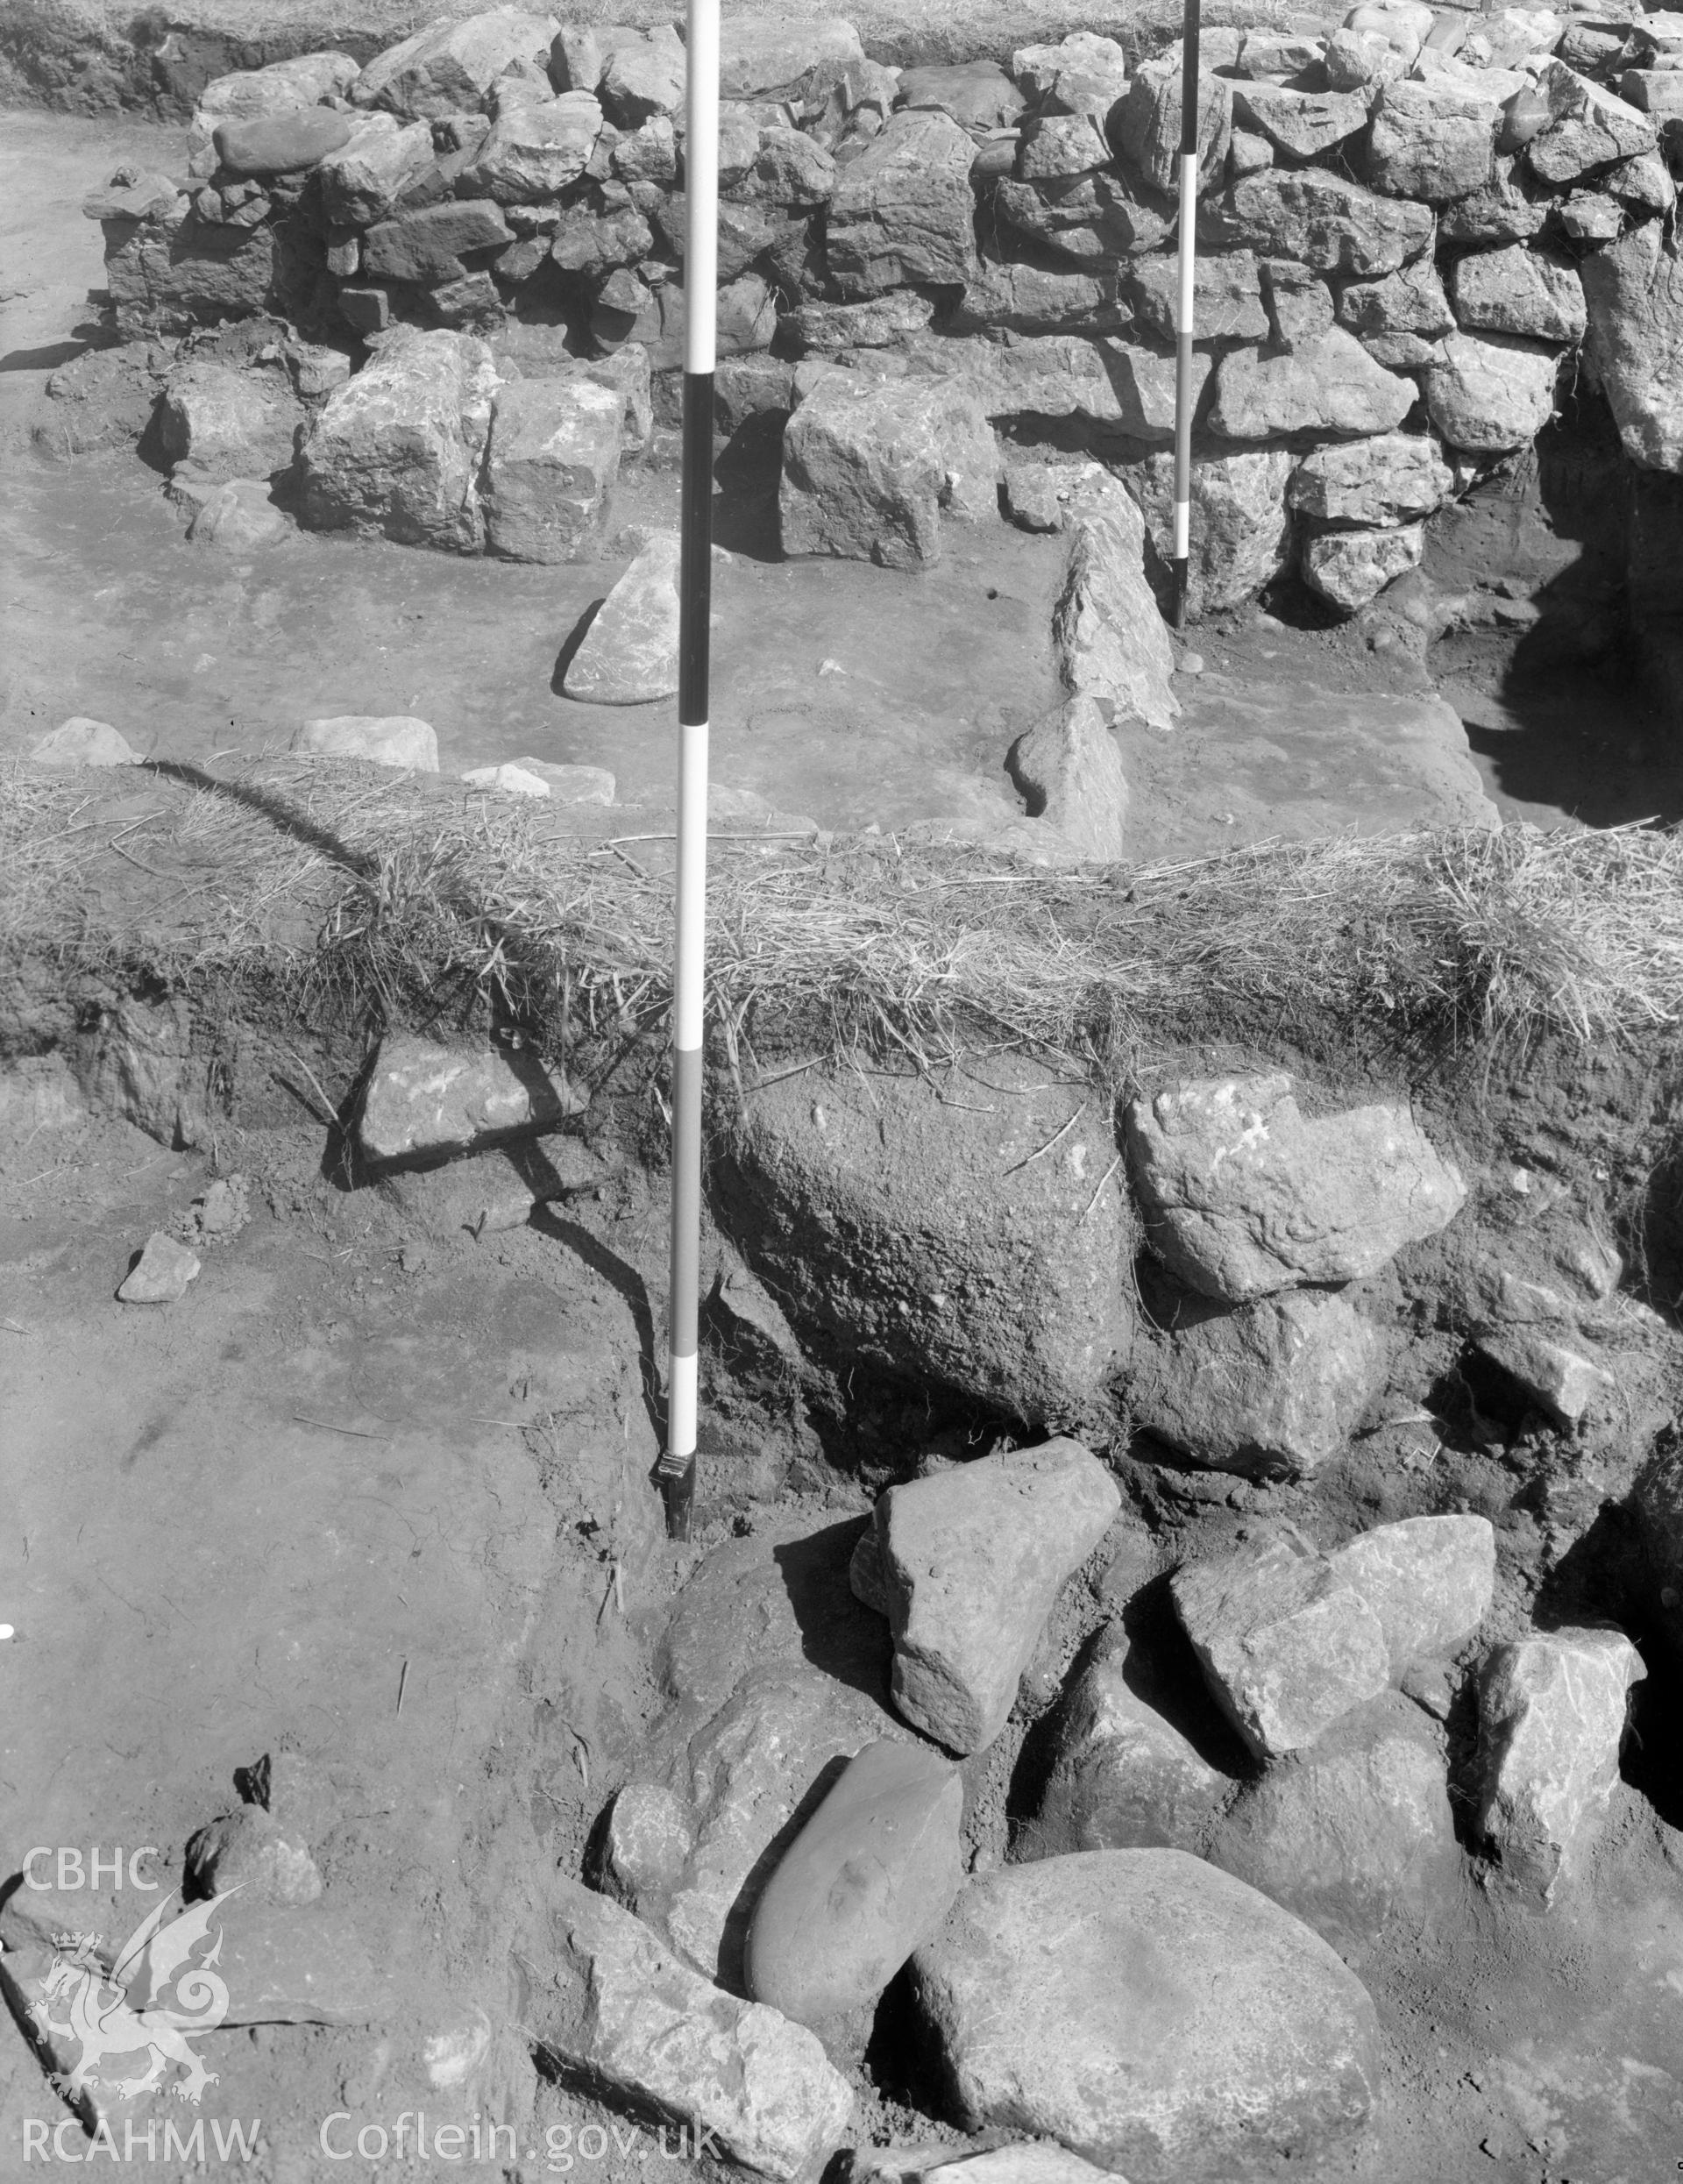 View of the excavation at Burry Holmes site D cut D1 & D2 taken 10.08.65.